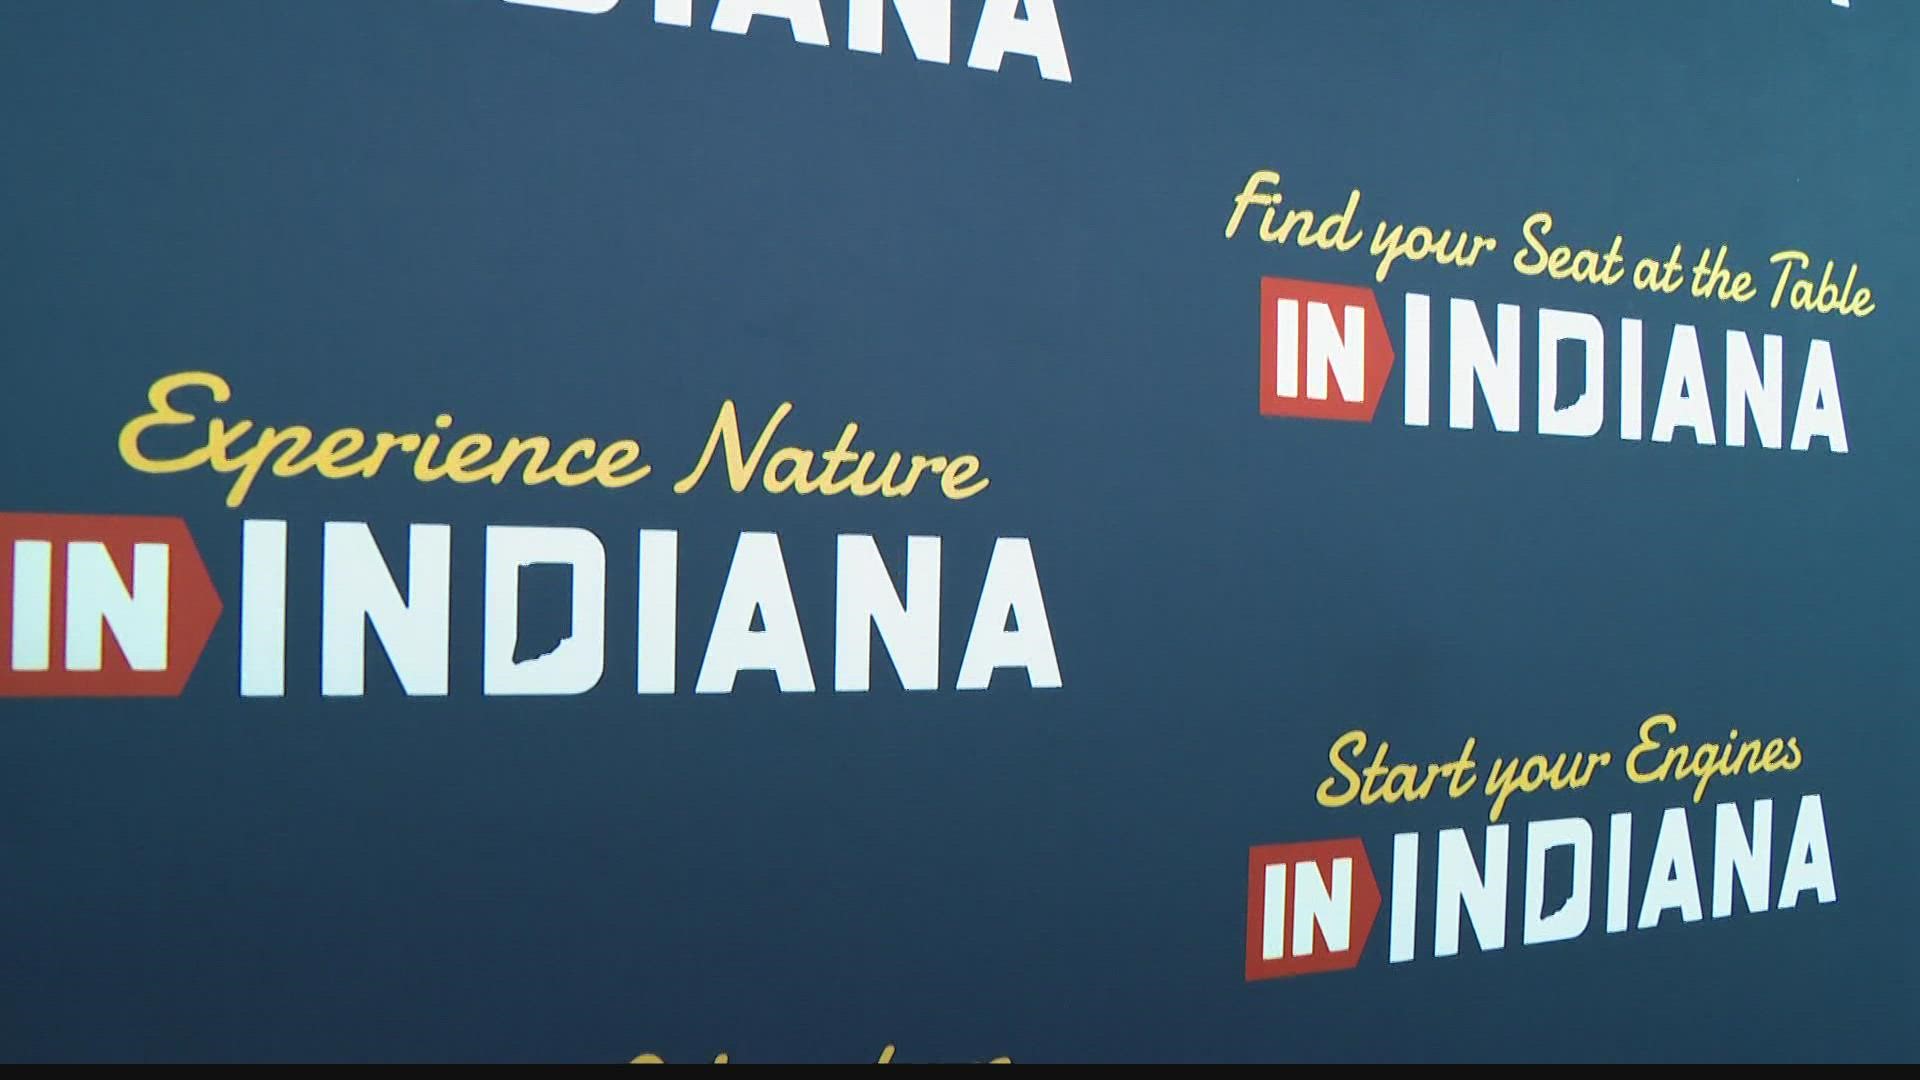 A new campaign effort, called "IN Indiana," strives to attract visitors to the Hoosier state to live, work and visit.